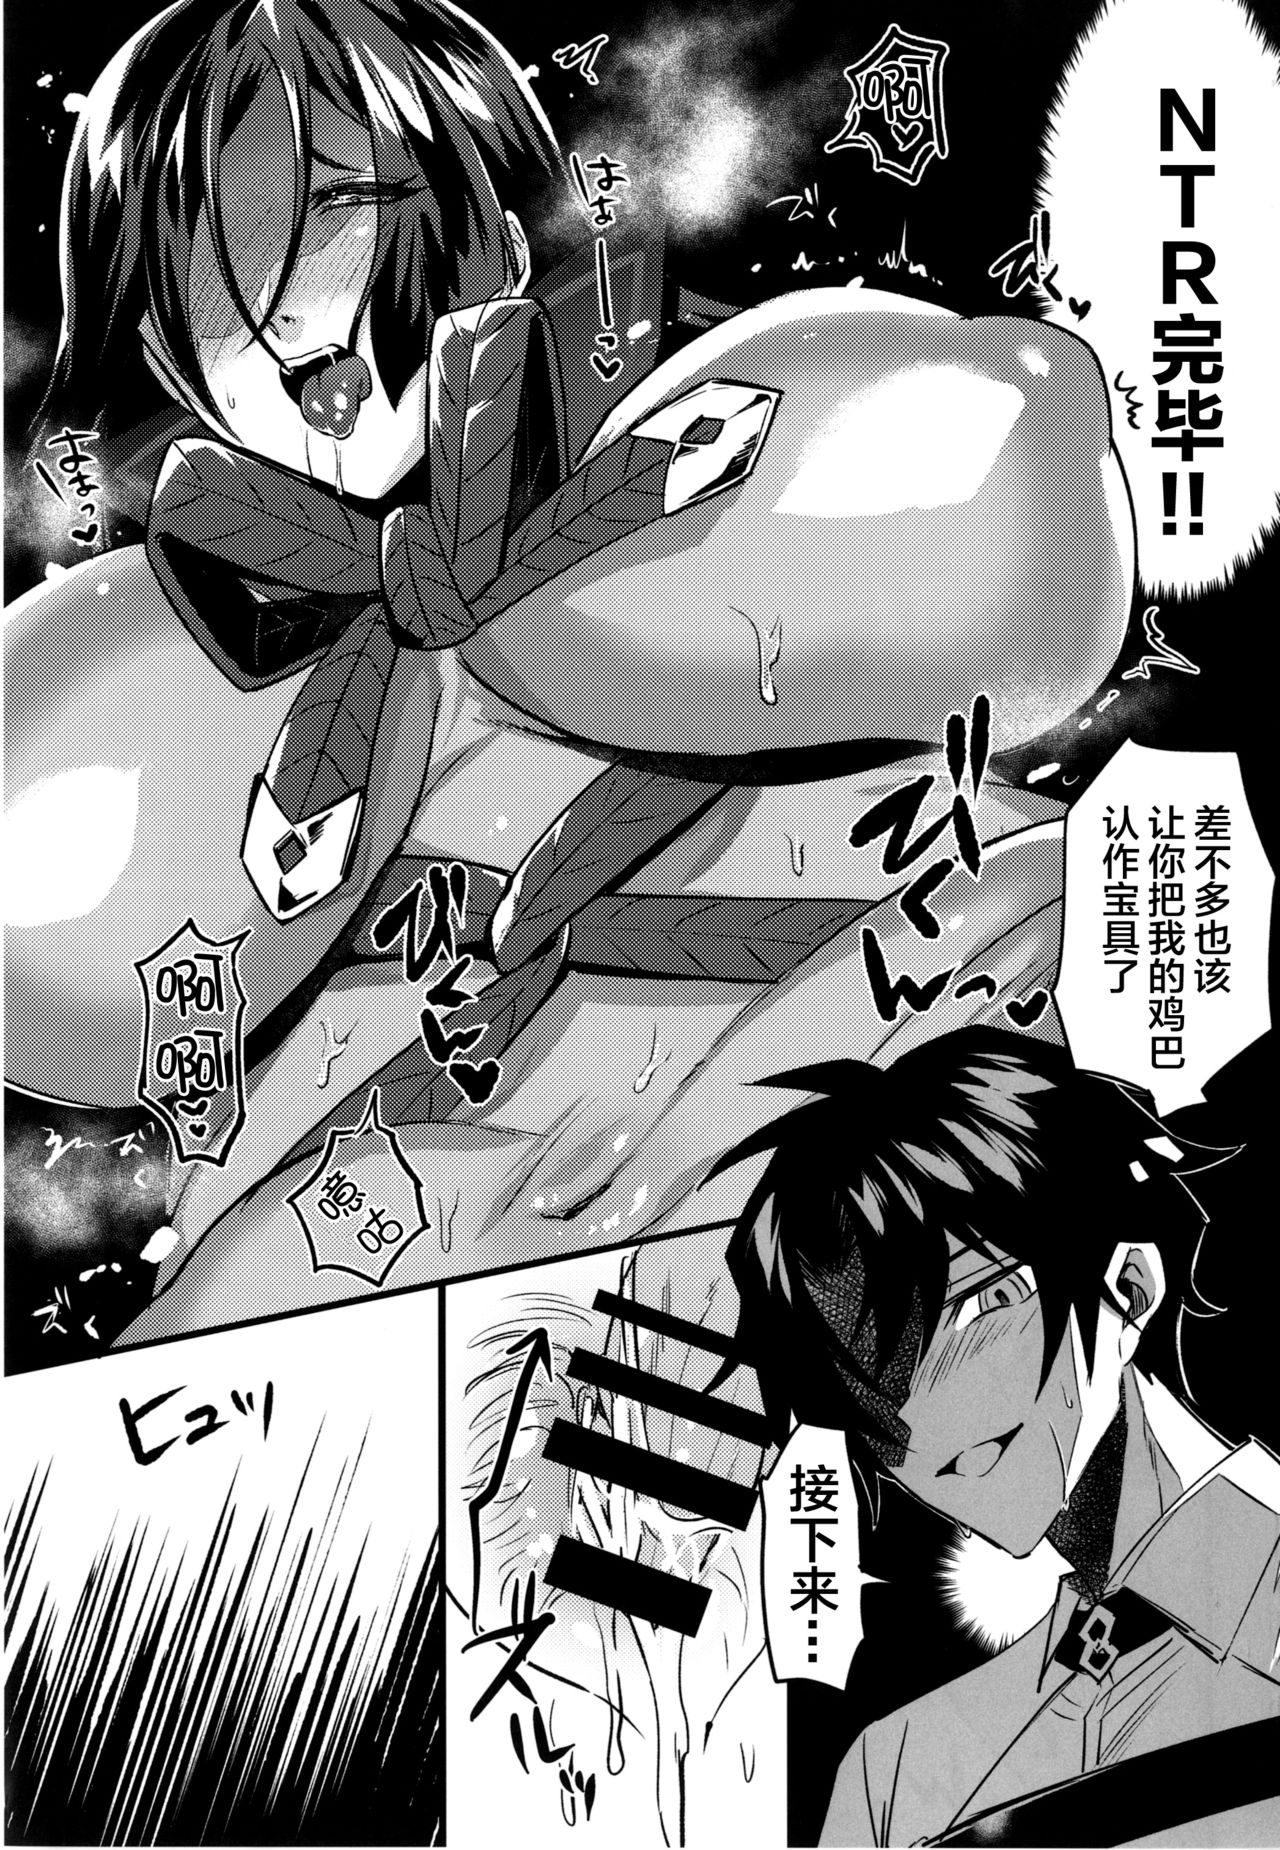 [Chimple Hotters (Chimple Hotter)] +SAPPORT no Raikou Mama to NTR Ecchi (Fate/Grand Order) [Chinese] [黎欧x新桥月白日语社] [Digital] page 19 full